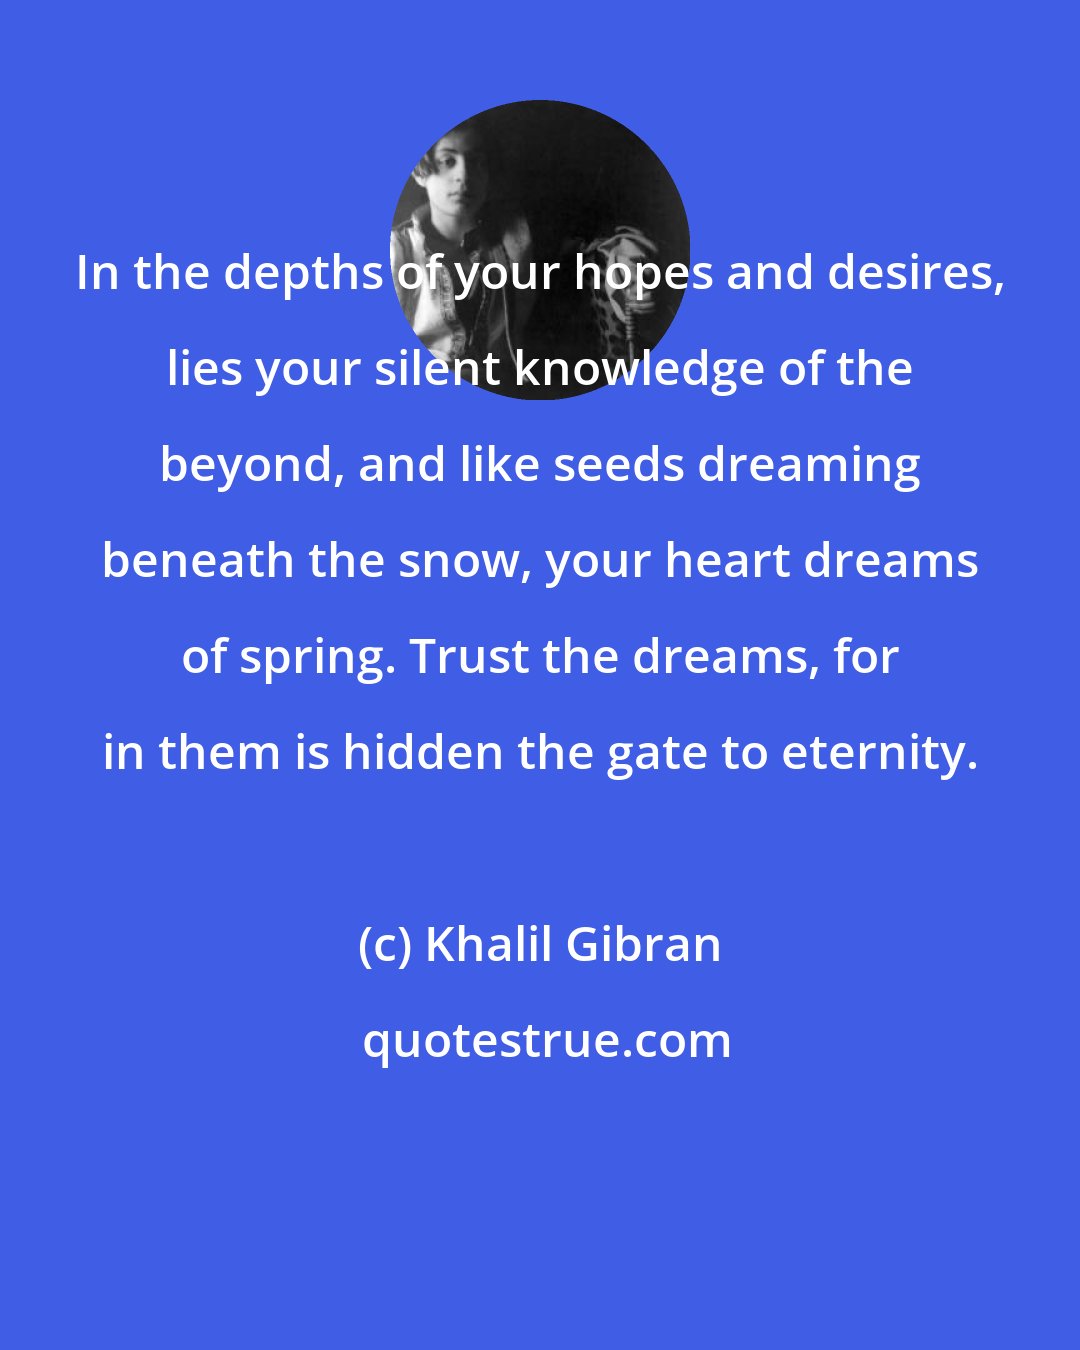 Khalil Gibran: In the depths of your hopes and desires, lies your silent knowledge of the beyond, and like seeds dreaming beneath the snow, your heart dreams of spring. Trust the dreams, for in them is hidden the gate to eternity.